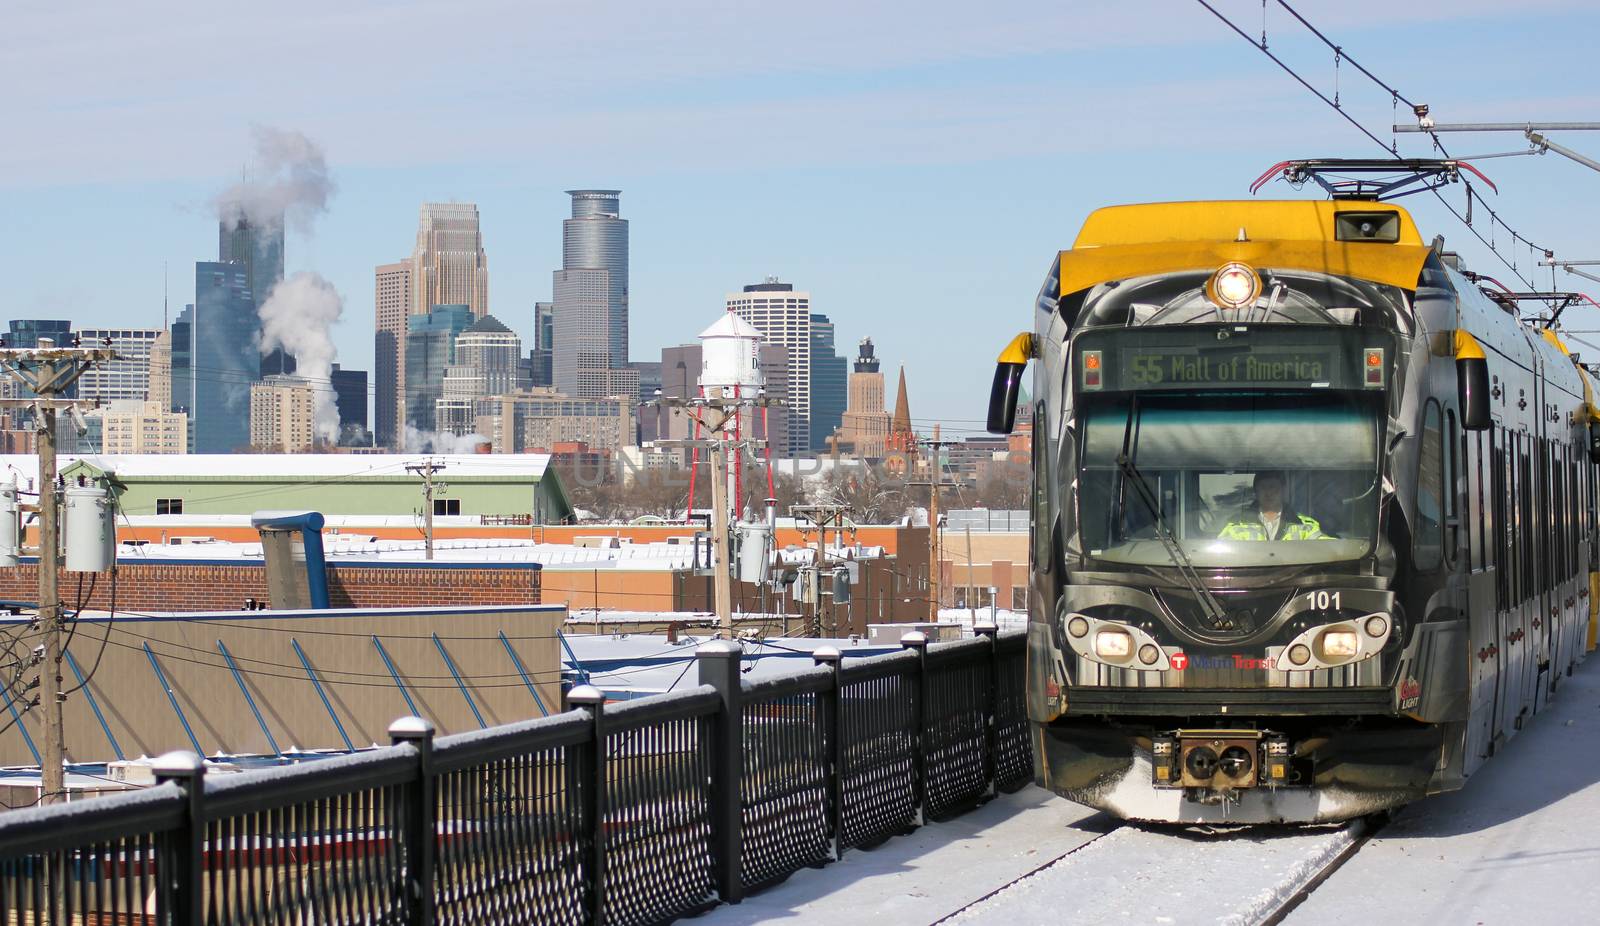 Light rail train passing by the Minneapolis skyline by bkenney5@gmail.com